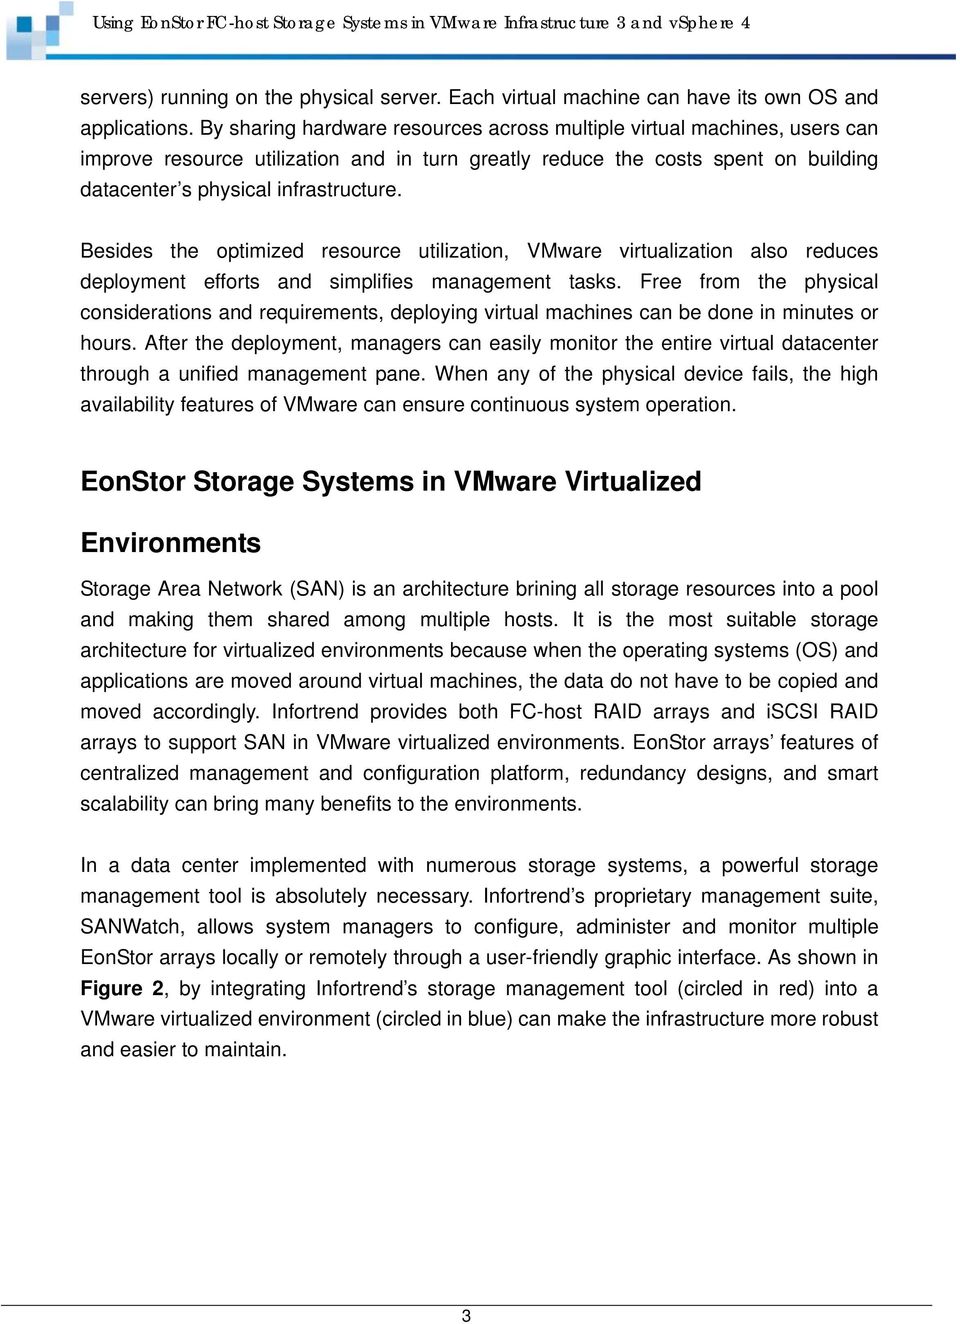 Besides the optimized resource utilization, VMware virtualization also reduces deployment efforts and simplifies management tasks.